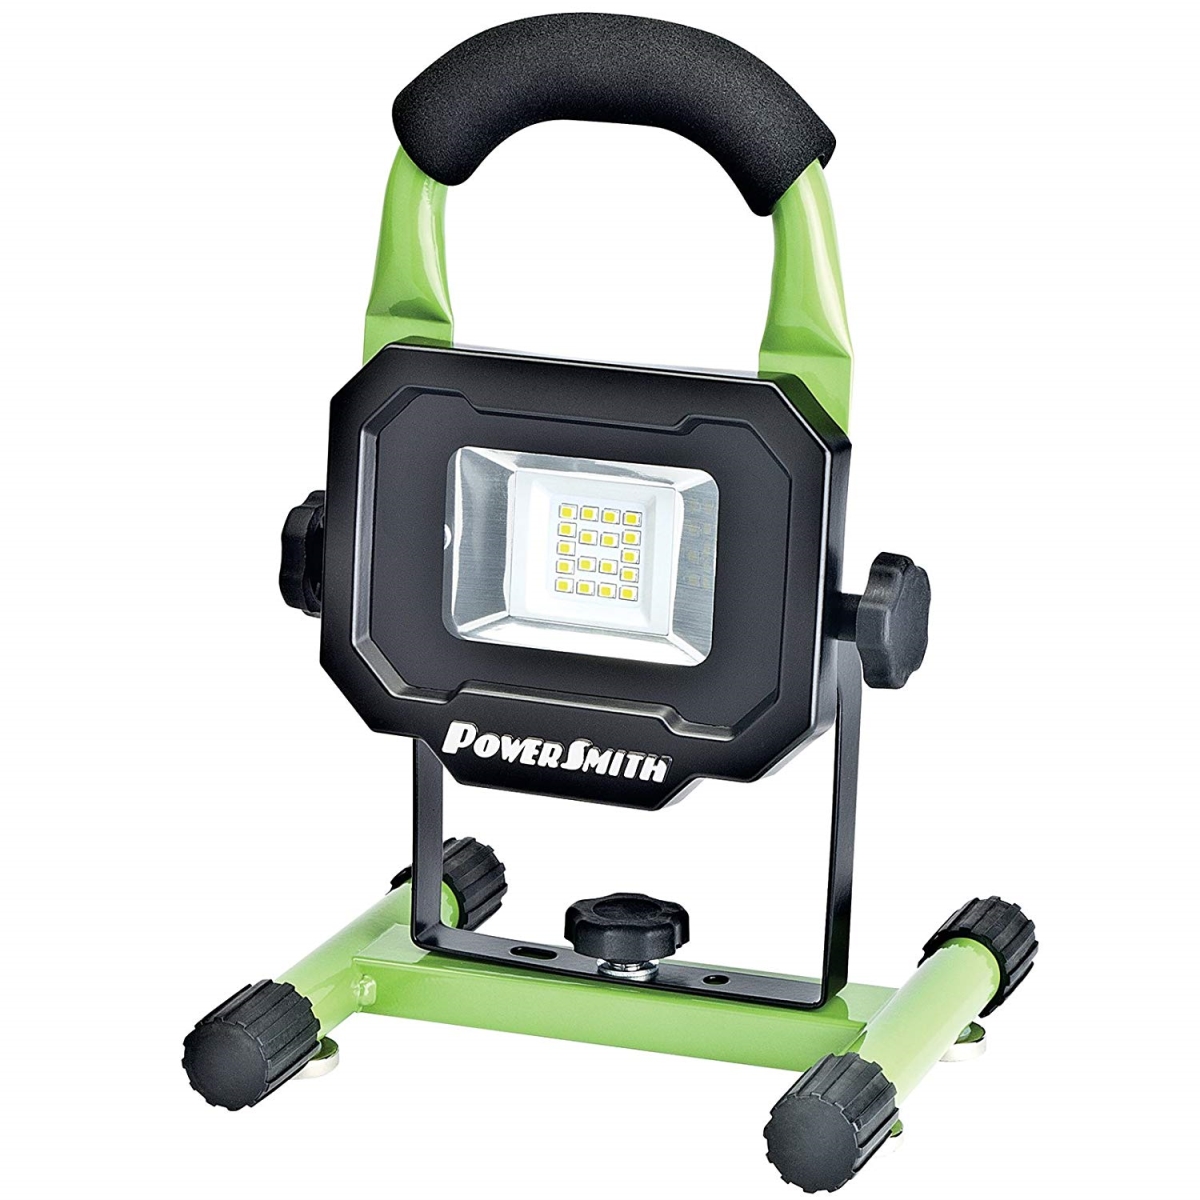 08-00598 10 Watt Rechargeable Led Work Light With Magnetic Base Usb Outlet - 1000 Lumen